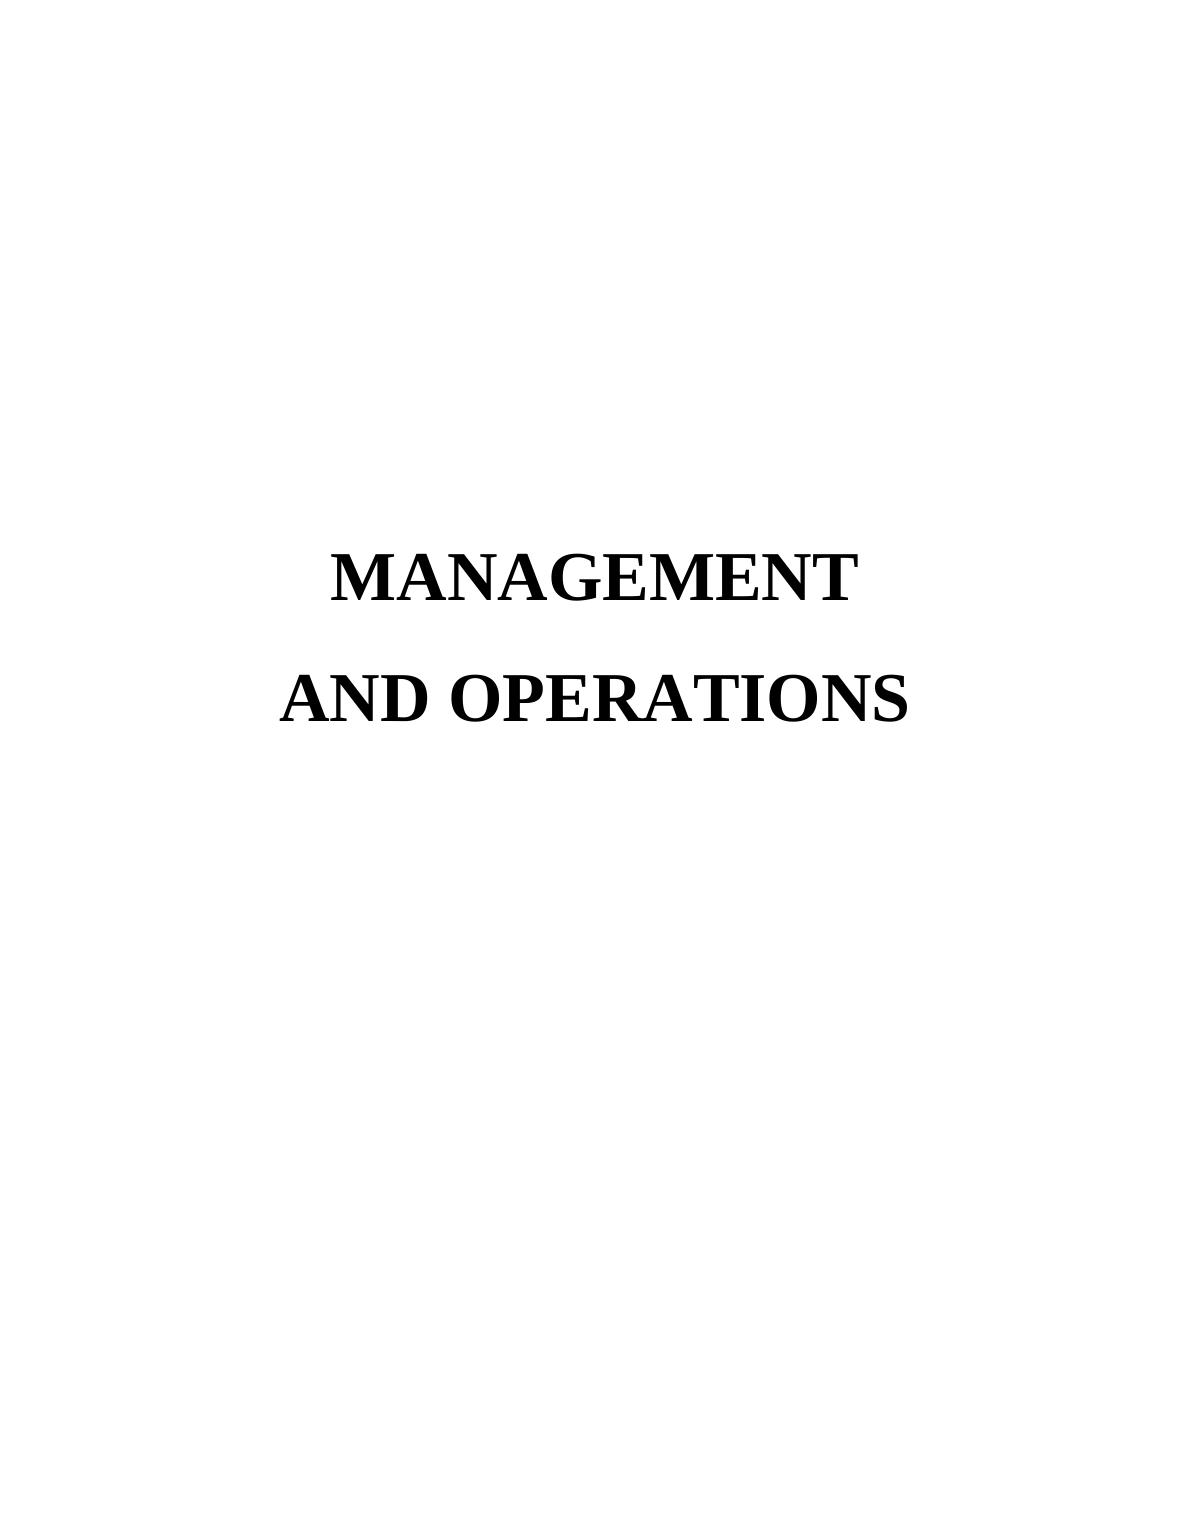 Management and Operations - Starbucks_1